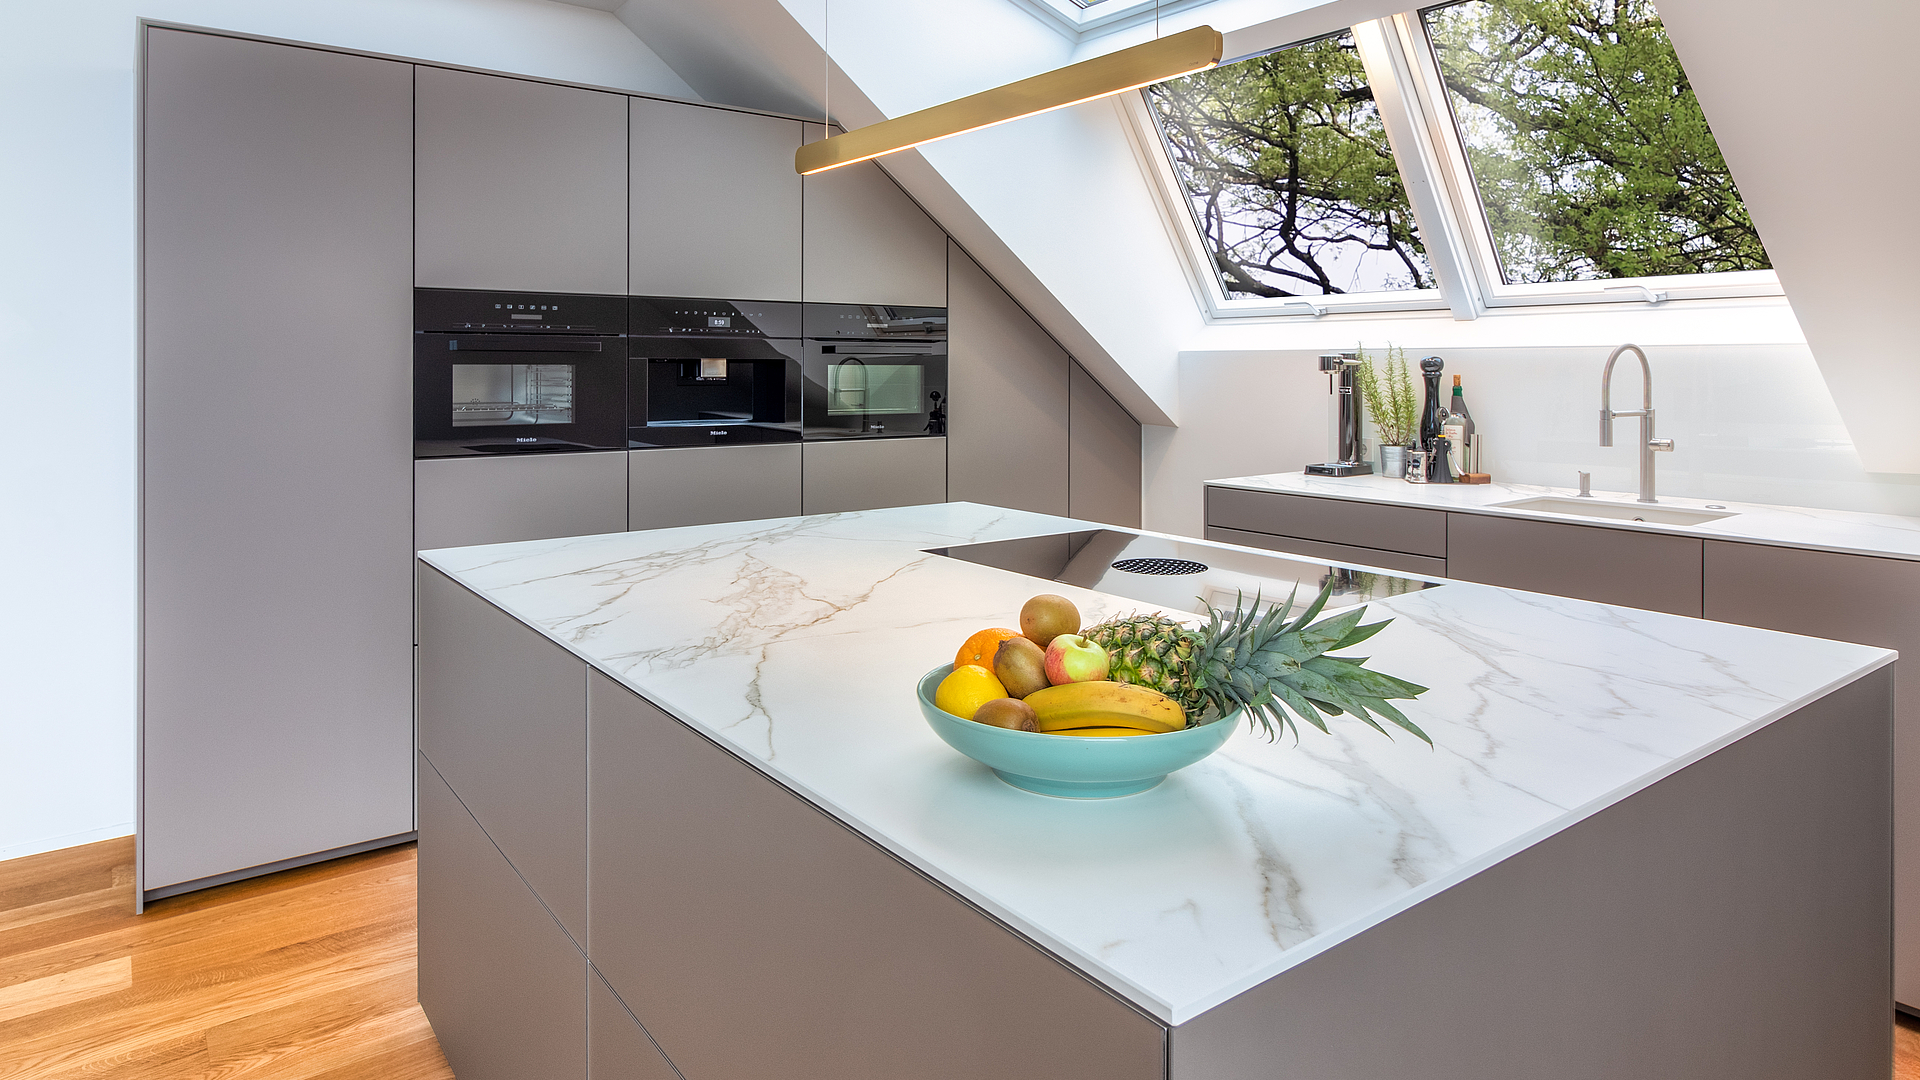 A spacious dream kitchen under the eaves